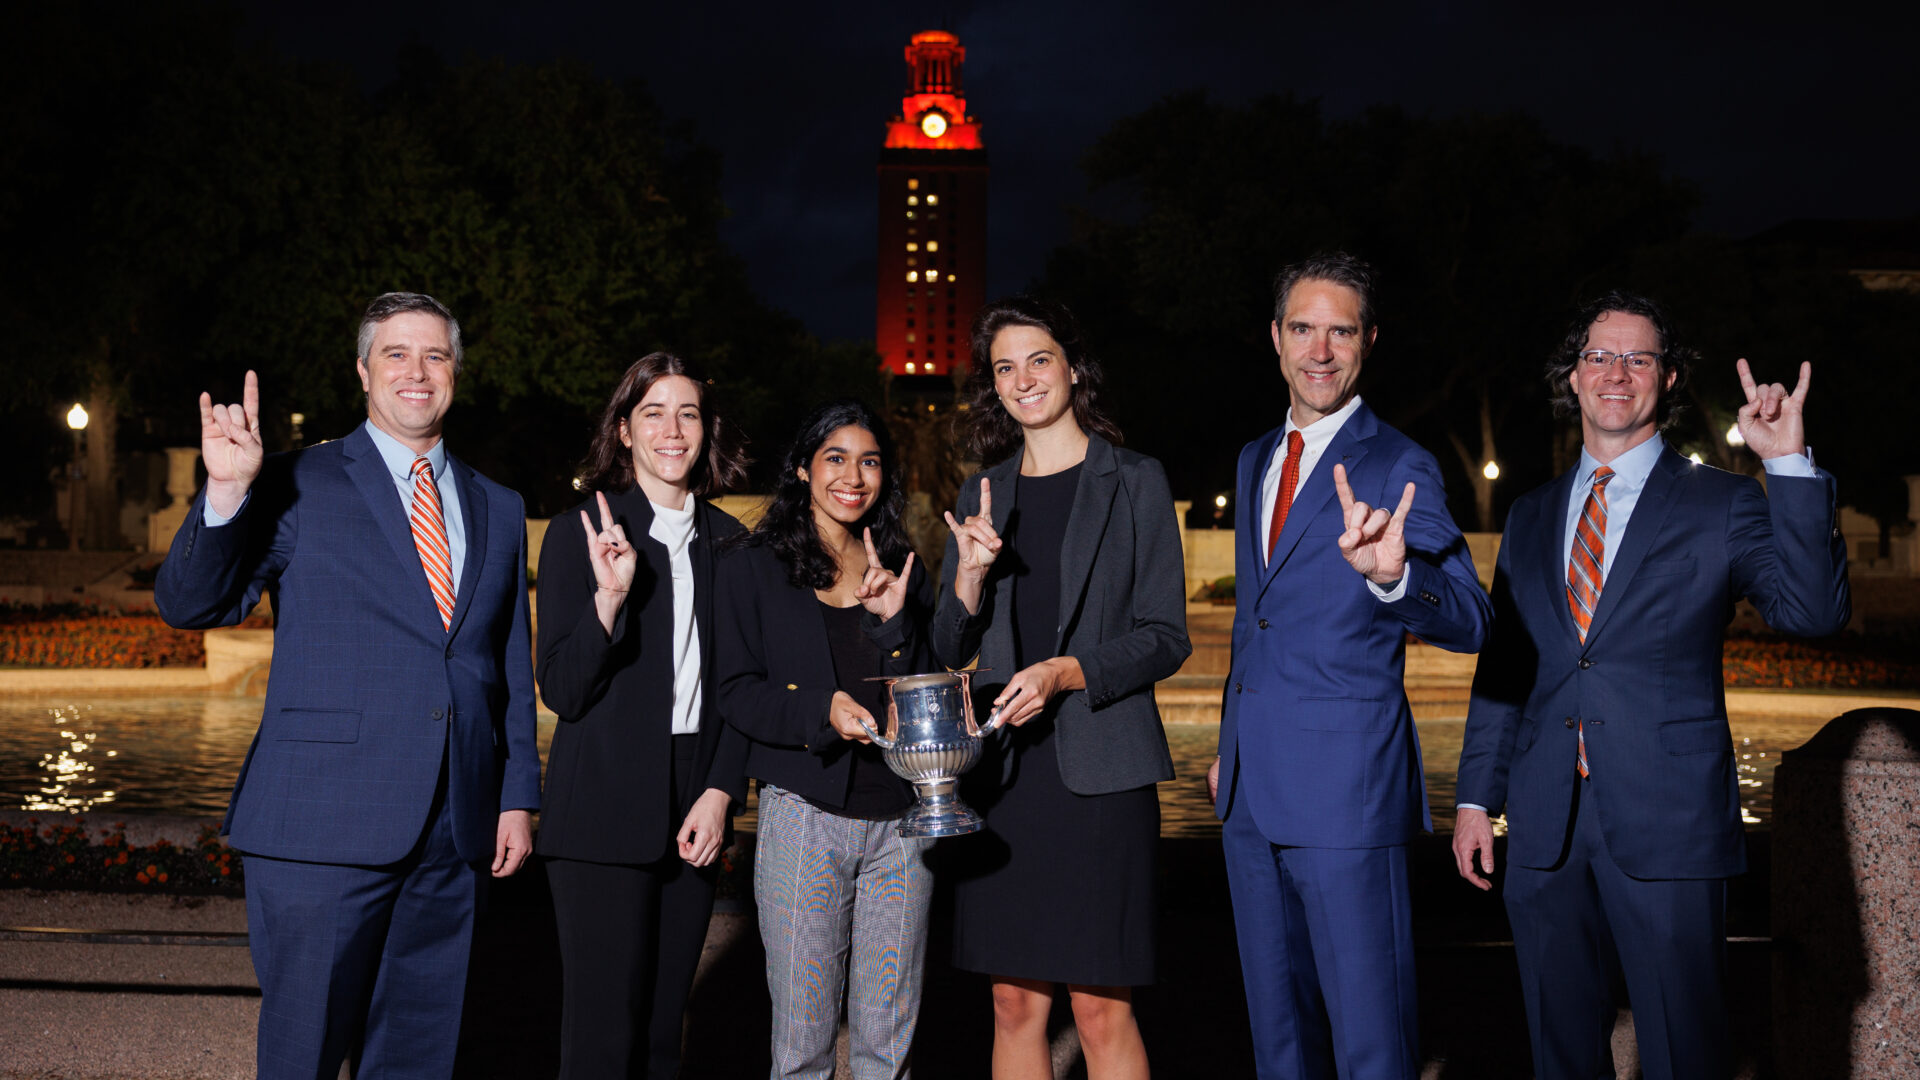 Students and faculty standing in front of the University of Texas Tower holding a trophy.